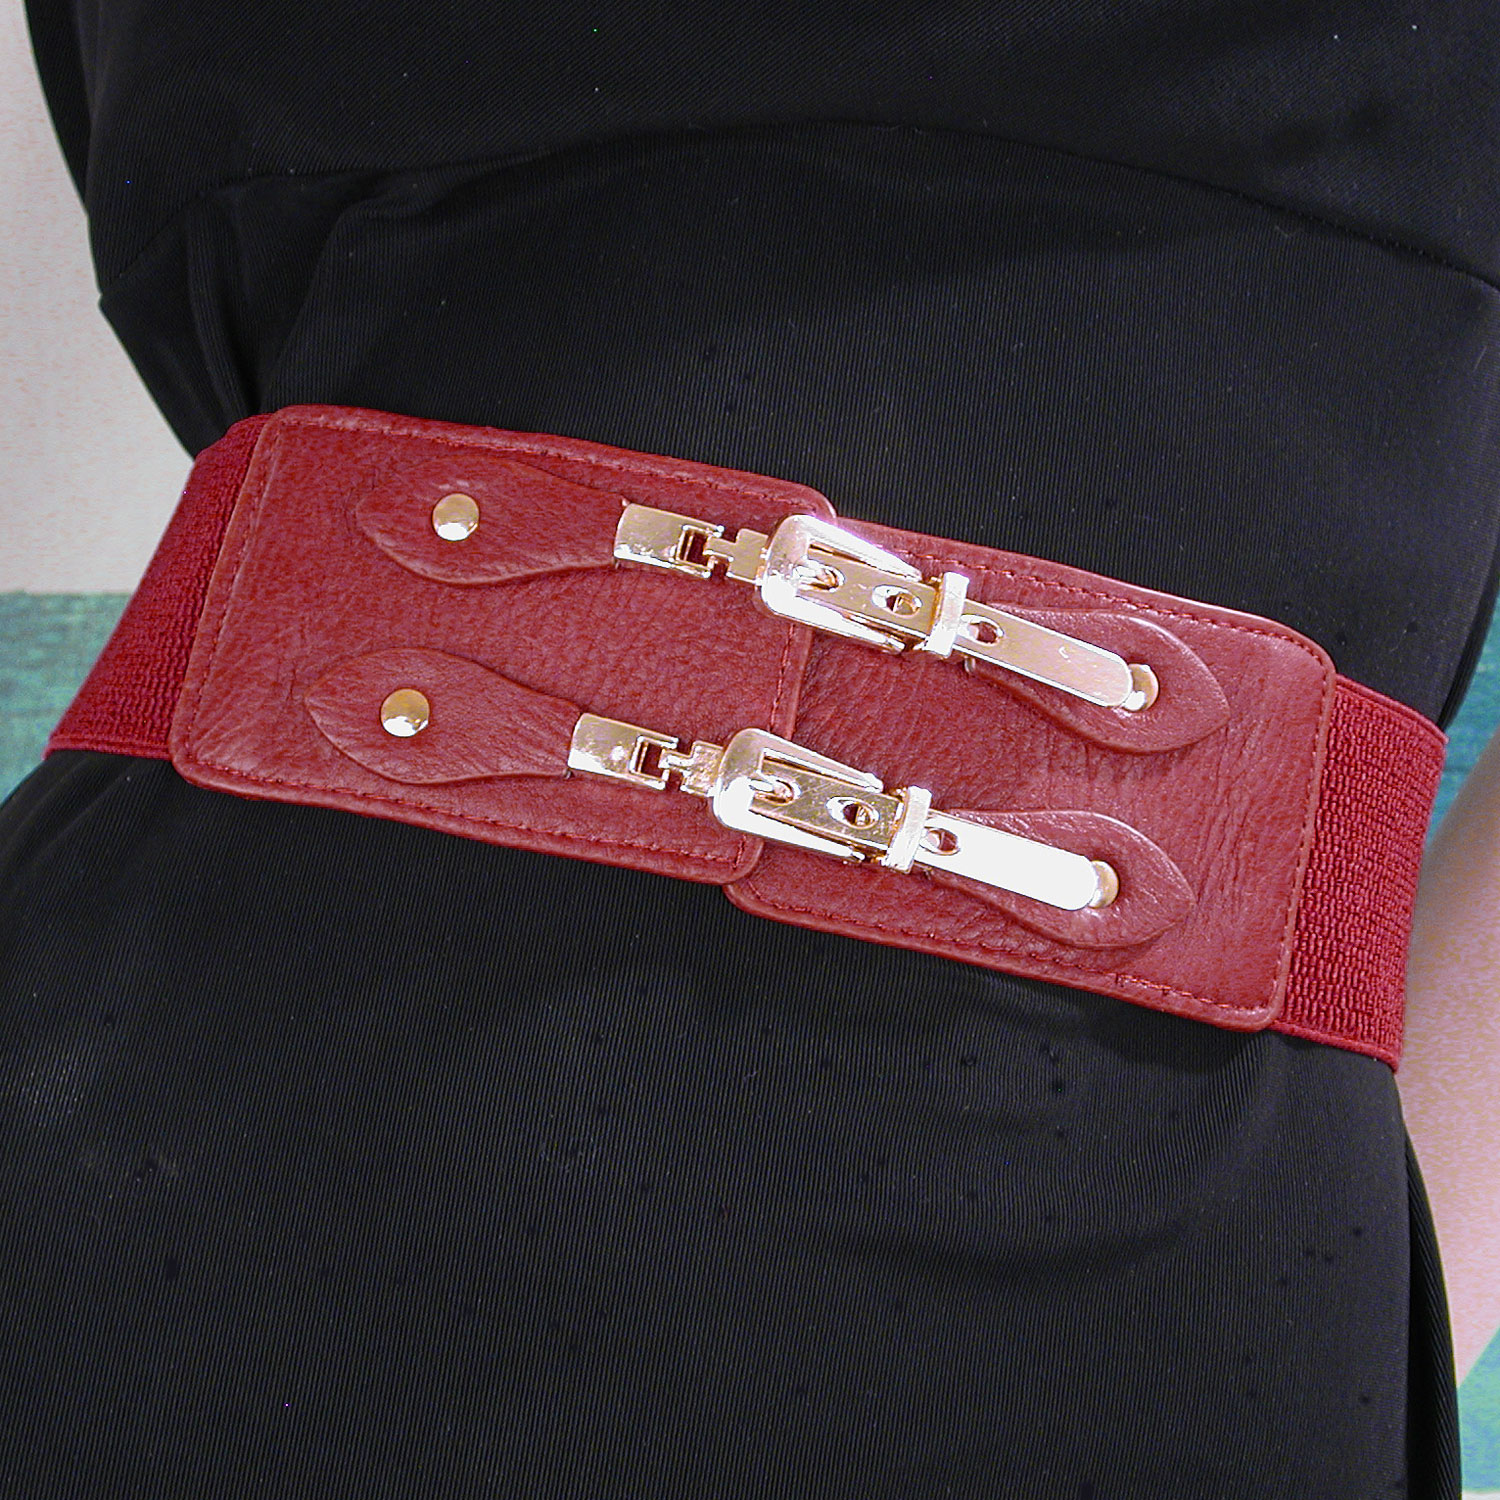 Wide Elastic Belt with Double Gold Buckles, a fashion accessorie - Evening Elegance